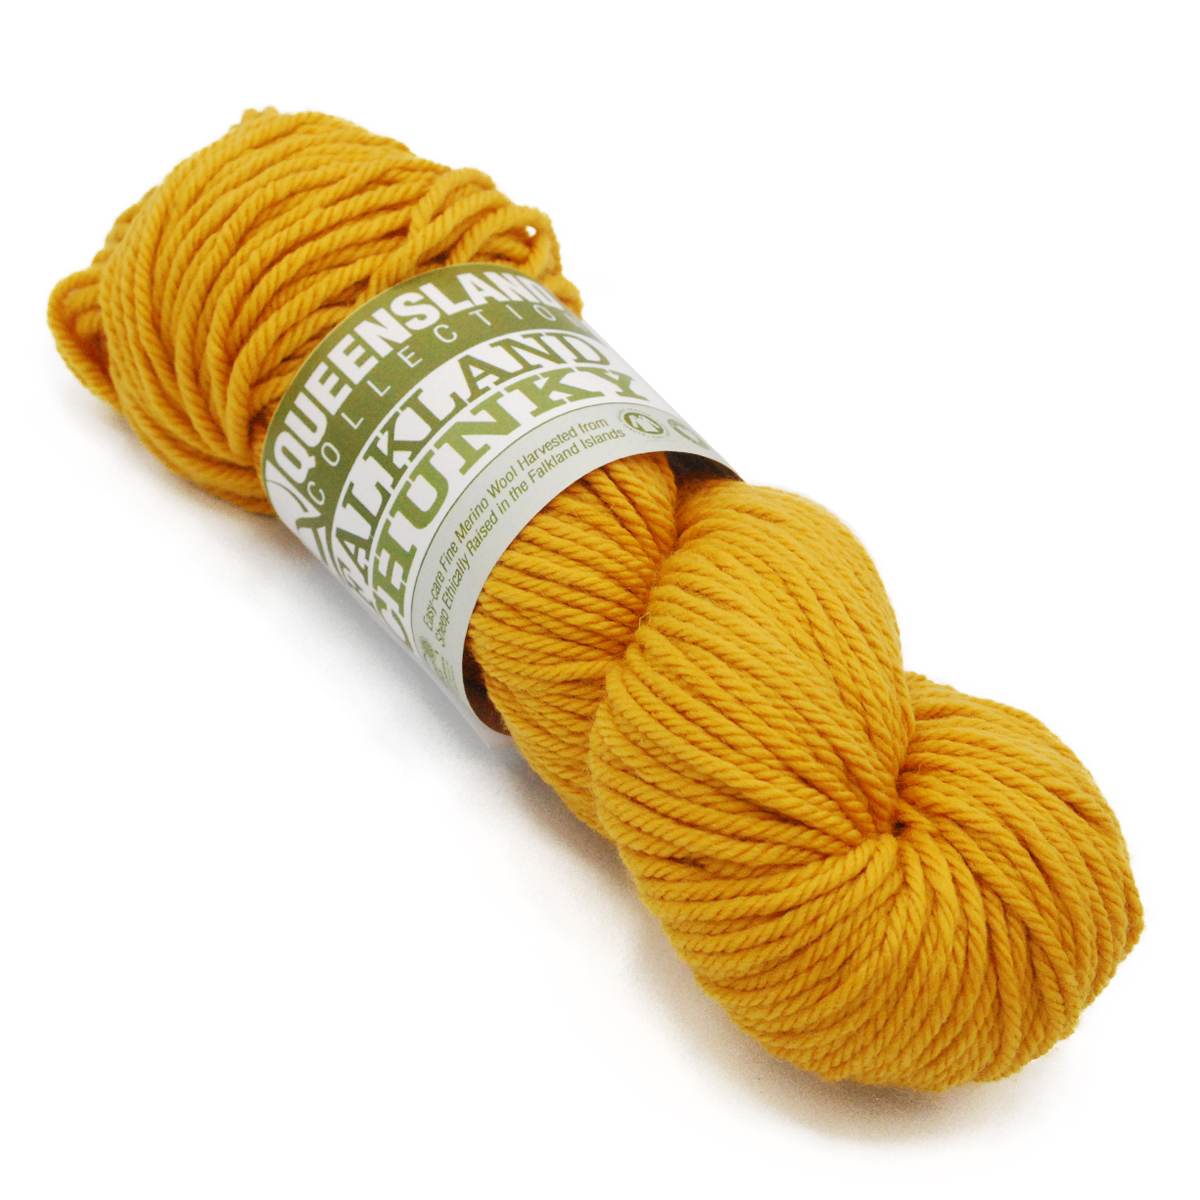 a skein of Falkland Chunky